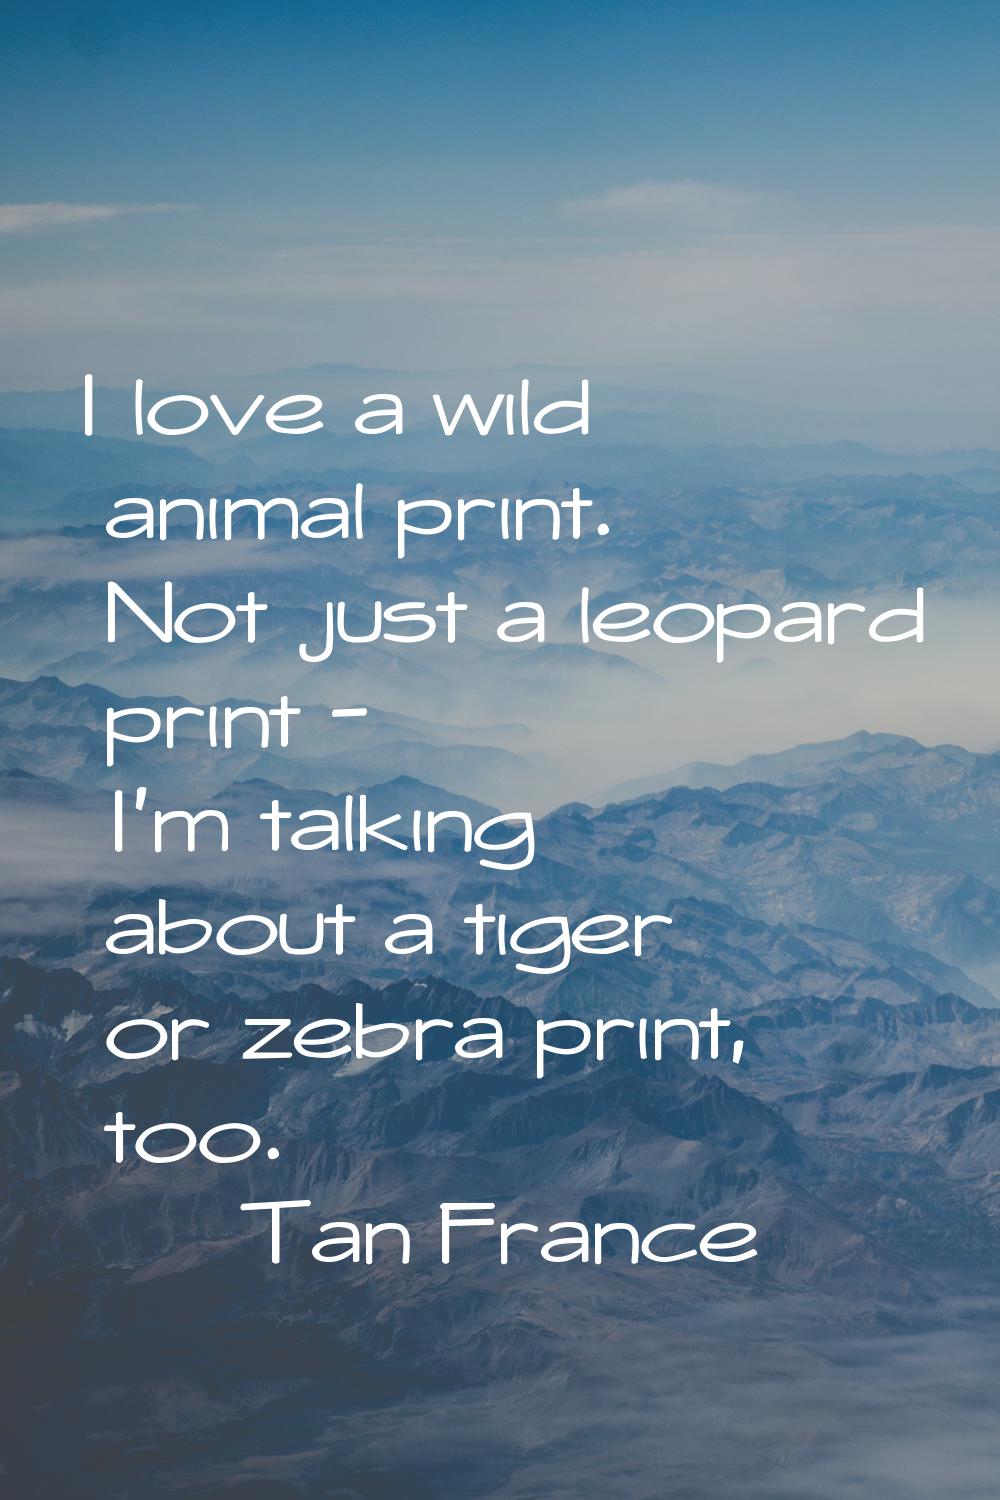 I love a wild animal print. Not just a leopard print - I'm talking about a tiger or zebra print, to